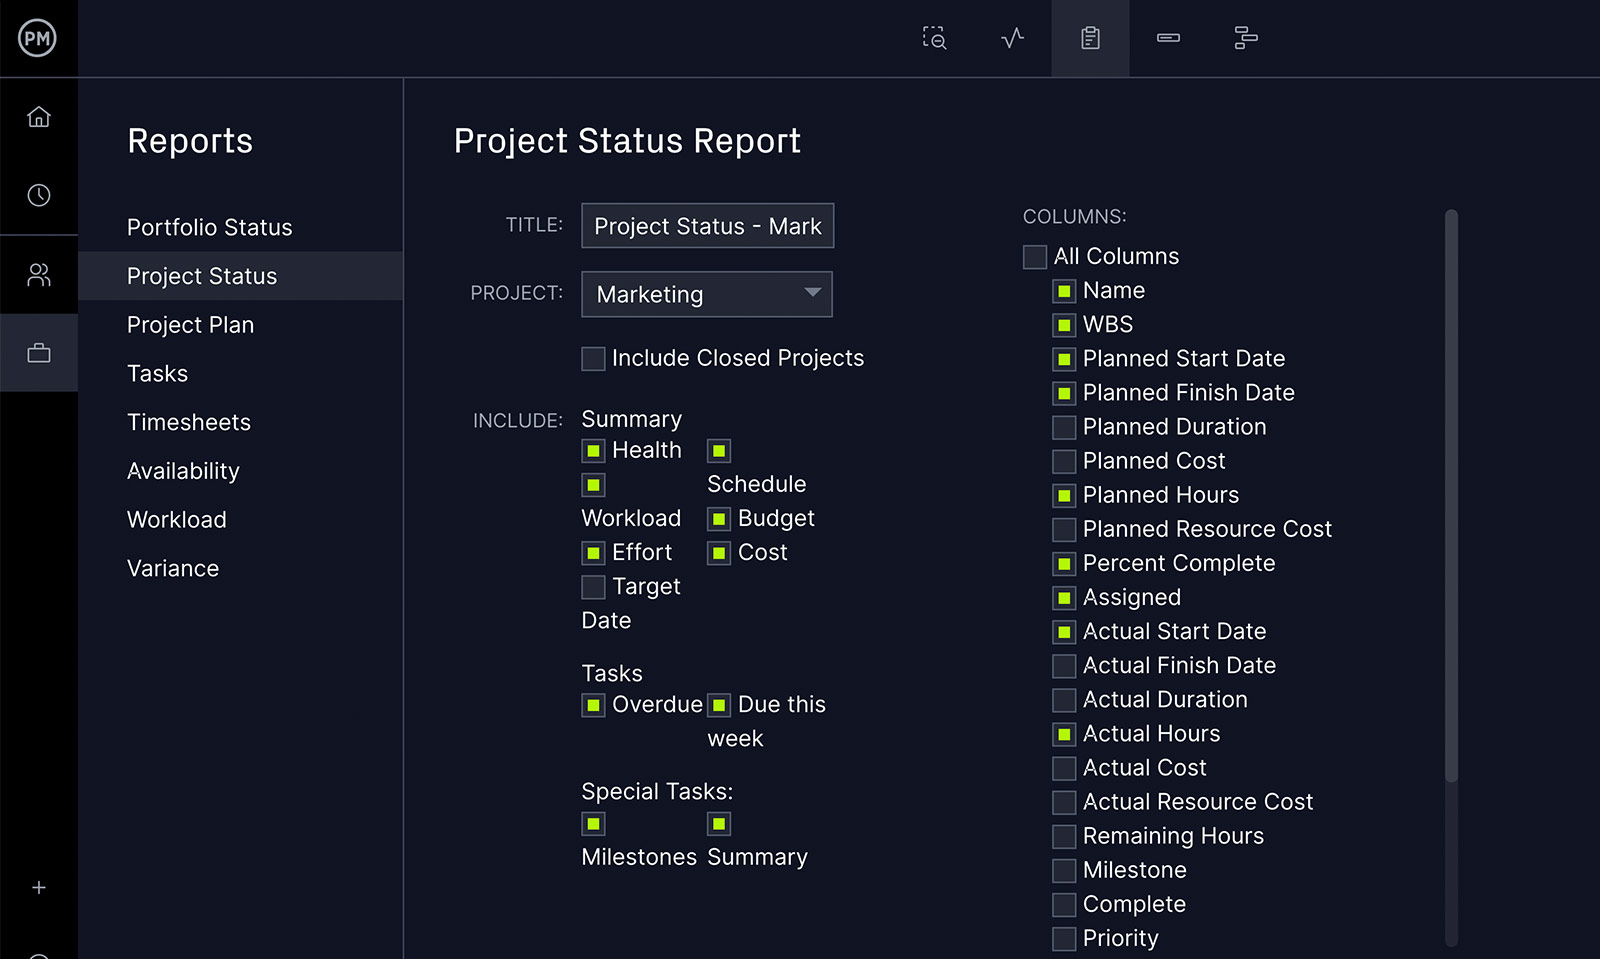 ProjectManager's project management reports help manufacturing teams communicate better